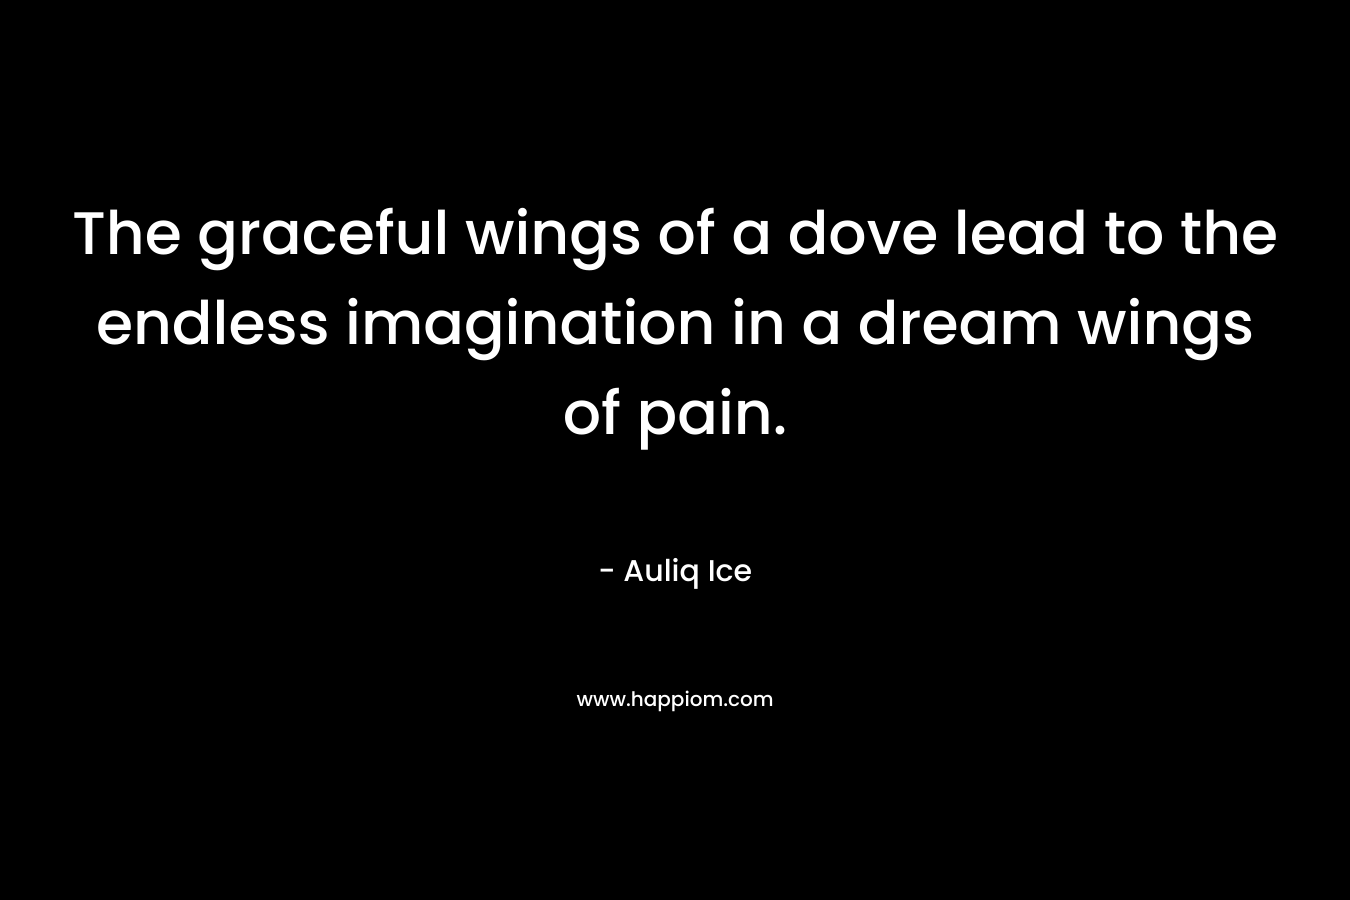 The graceful wings of a dove lead to the endless imagination in a dream wings of pain.